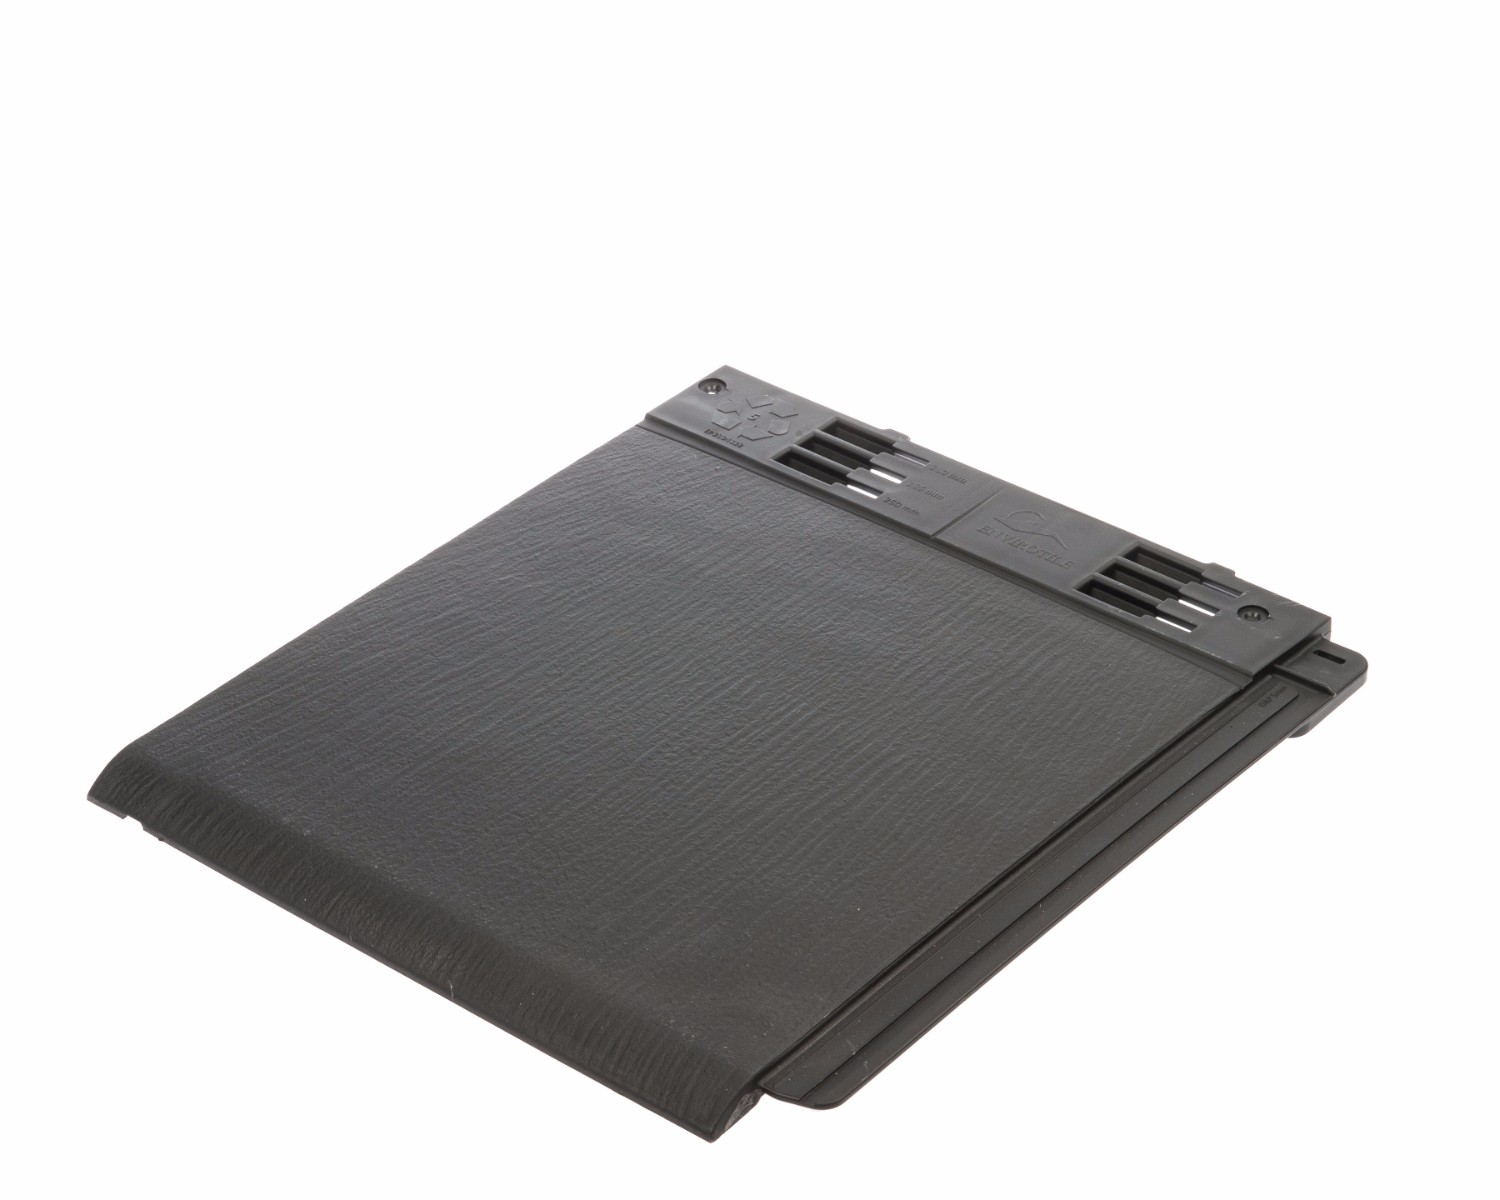 Envirotile - Plastic Tile - Anthracite (Pack of 10)